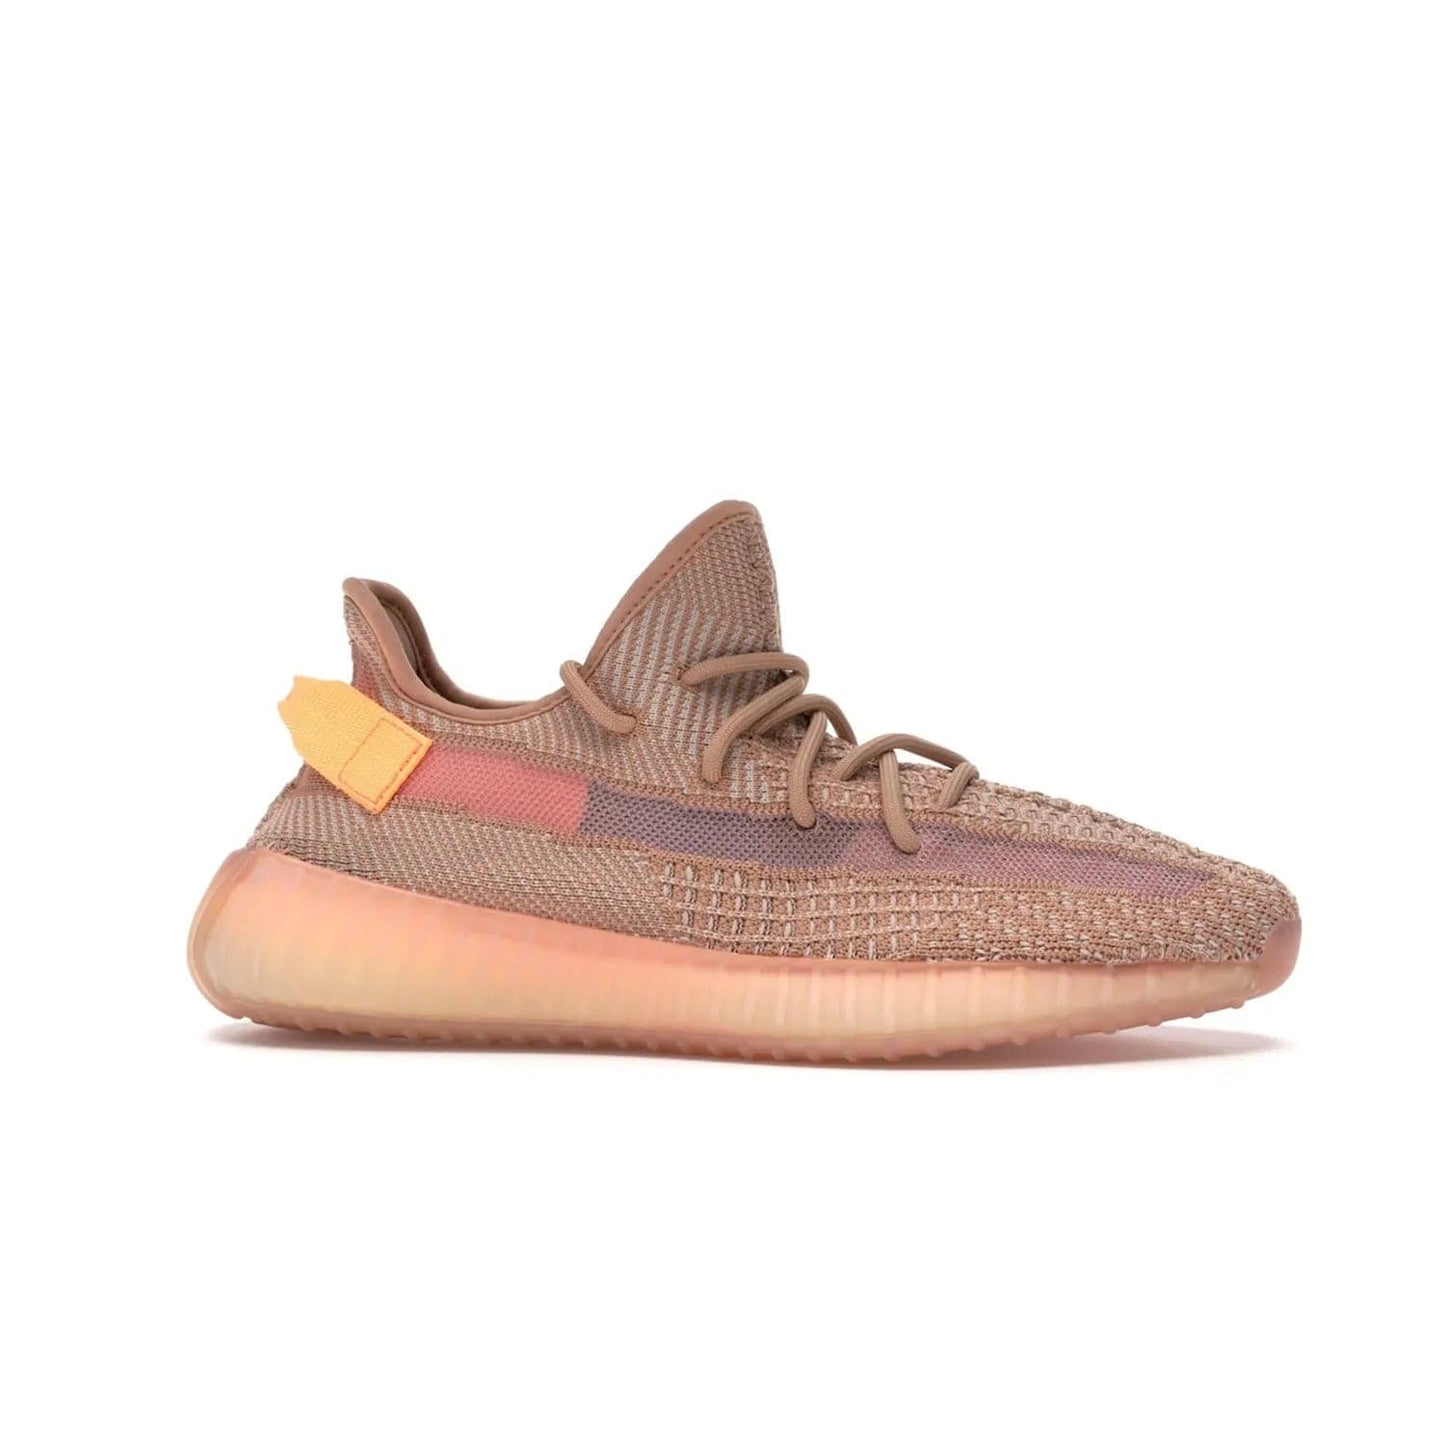 adidas Yeezy Boost 350 V2 Clay - Image 2 - Only at www.BallersClubKickz.com - The adidas Yeezy Boost 350 V2 Clay - style and swag in one shoe. Orange accents, clay midsole and sole. Get yours today!